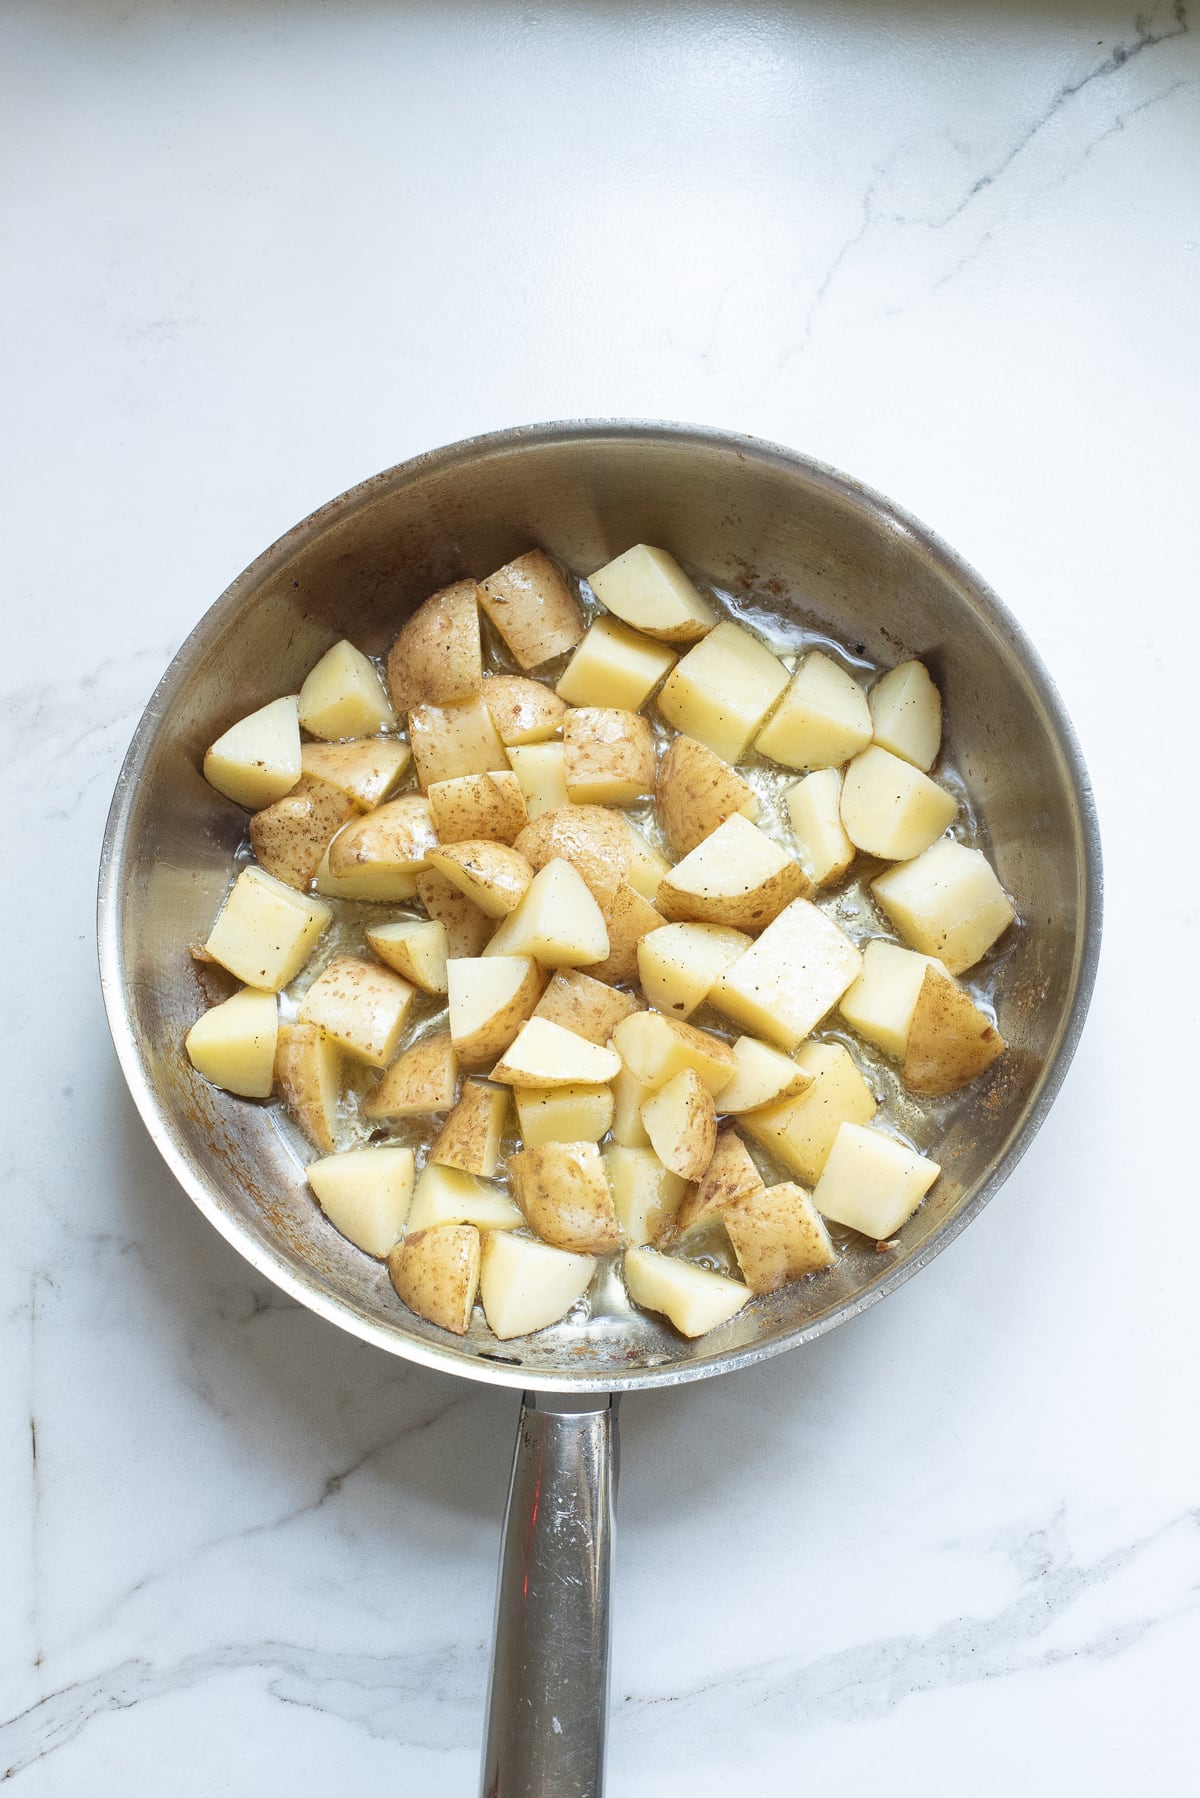 Chunks of potato in a metal skillet